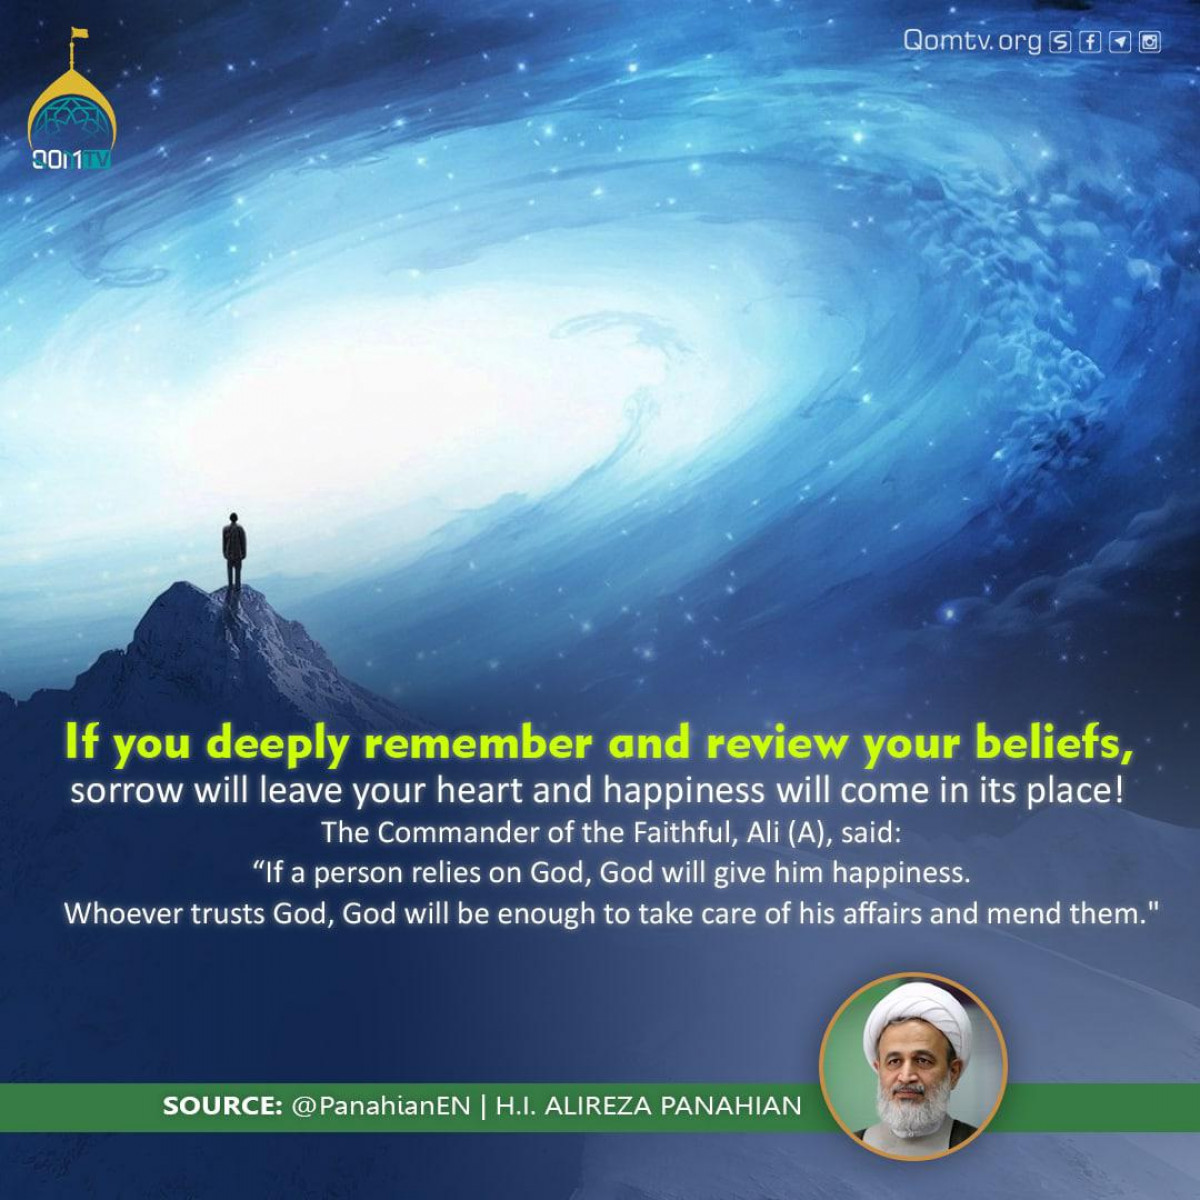 If you deeply remember and review your beliefs